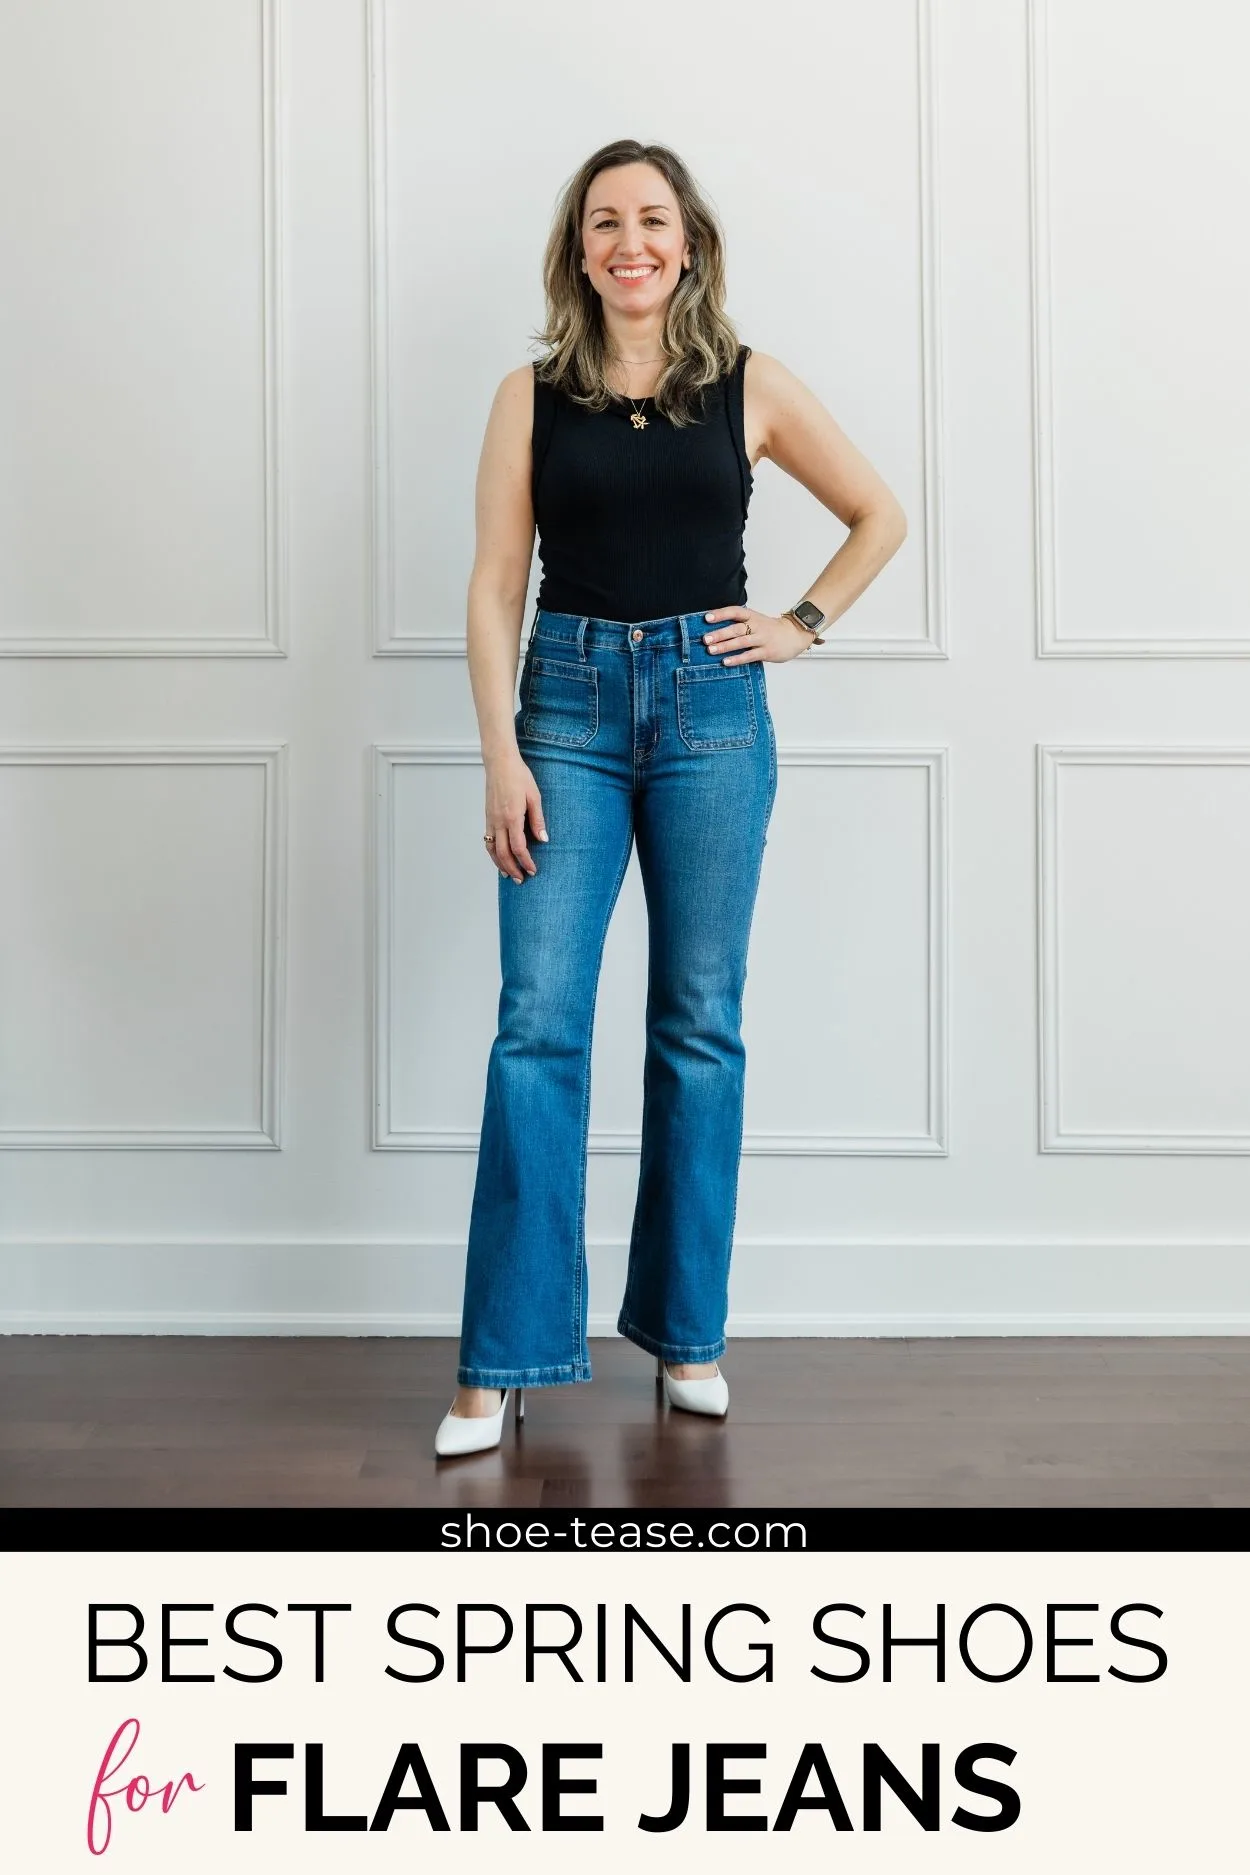 Woman posing wearing a black tank top, long blue denim flare jeans and white high heel pumps standing in front of a white wall.